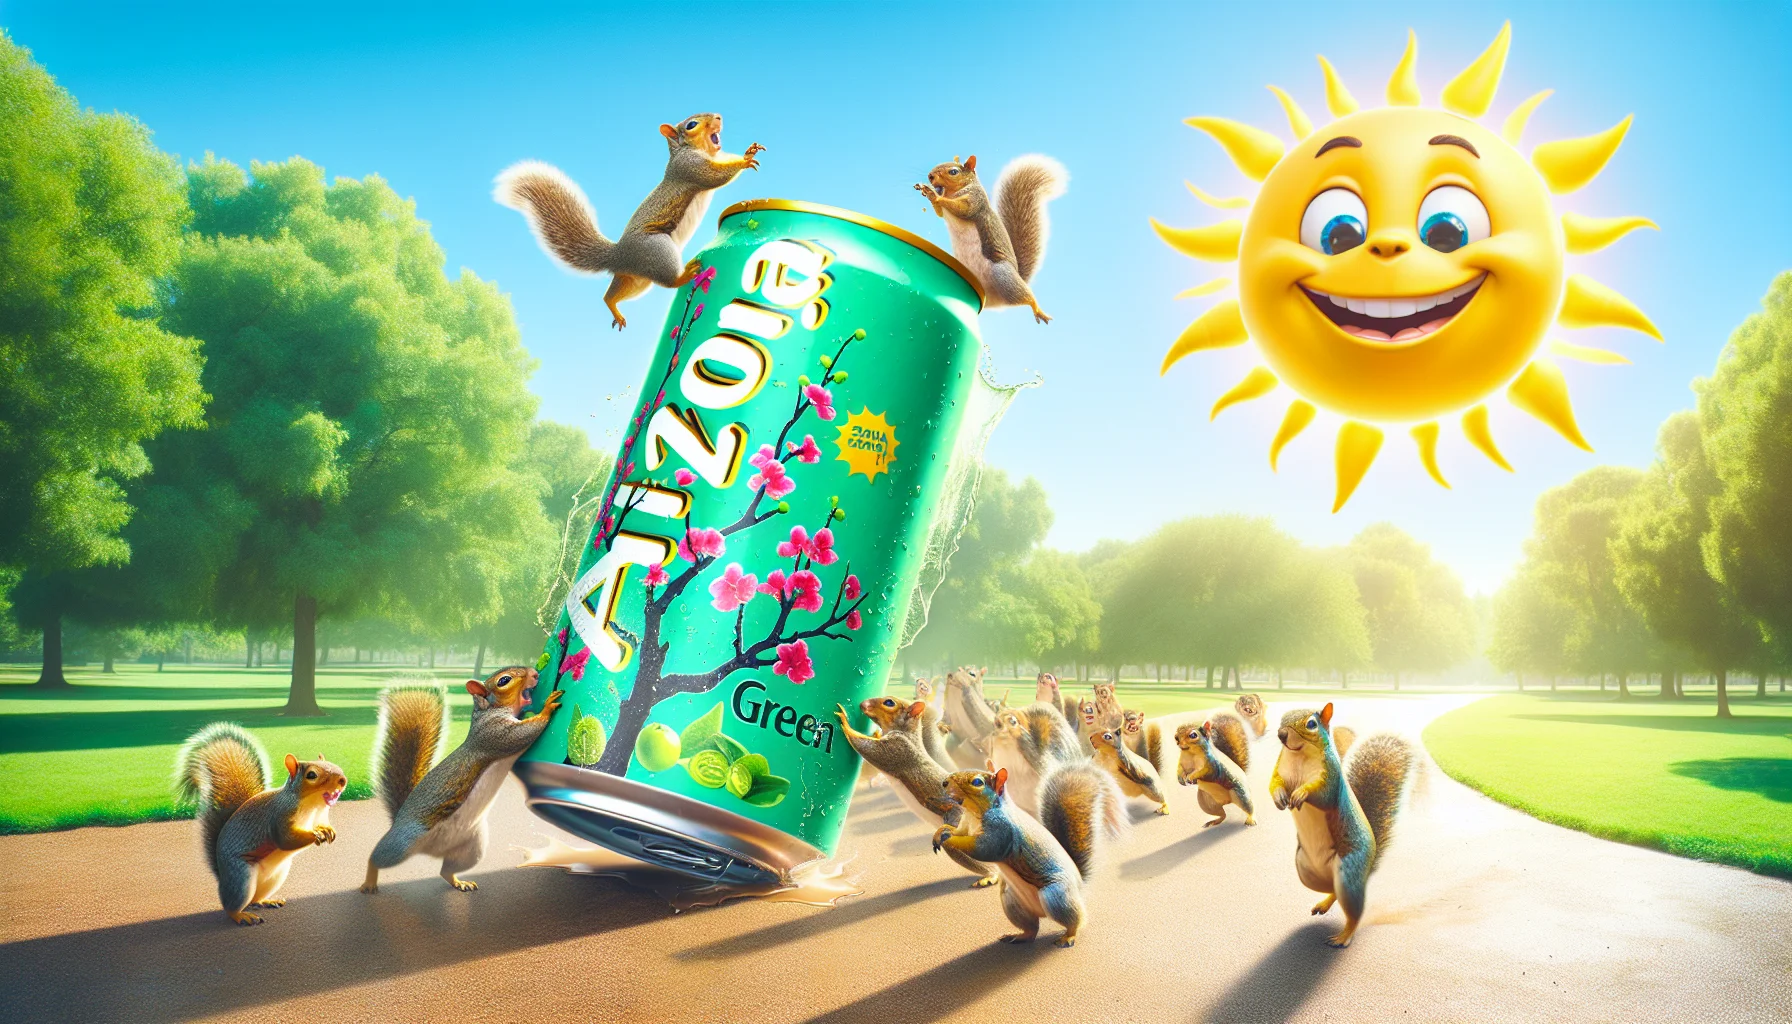 Create a vibrant and playful image of a large can of green tea branded as 'Arizona.' Situate the can in a humorous scenario in a sunlit park, with animals like squirrels, leaping playfully towards the can, showing an exaggerated fascination towards it. The can should be tilted slightly, giving the illusion that the cheering squirrel crowd is pushing it. Also, include smiling faces on the sun and the flowers, indicating the warmth and the fun of the scene. The backdrop of clear blue skies and lush green trees adds to the natural charm. The scene should evoke a sense of joy and elicit a chuckle, encouraging people to join in the fun and enjoy the beverage.